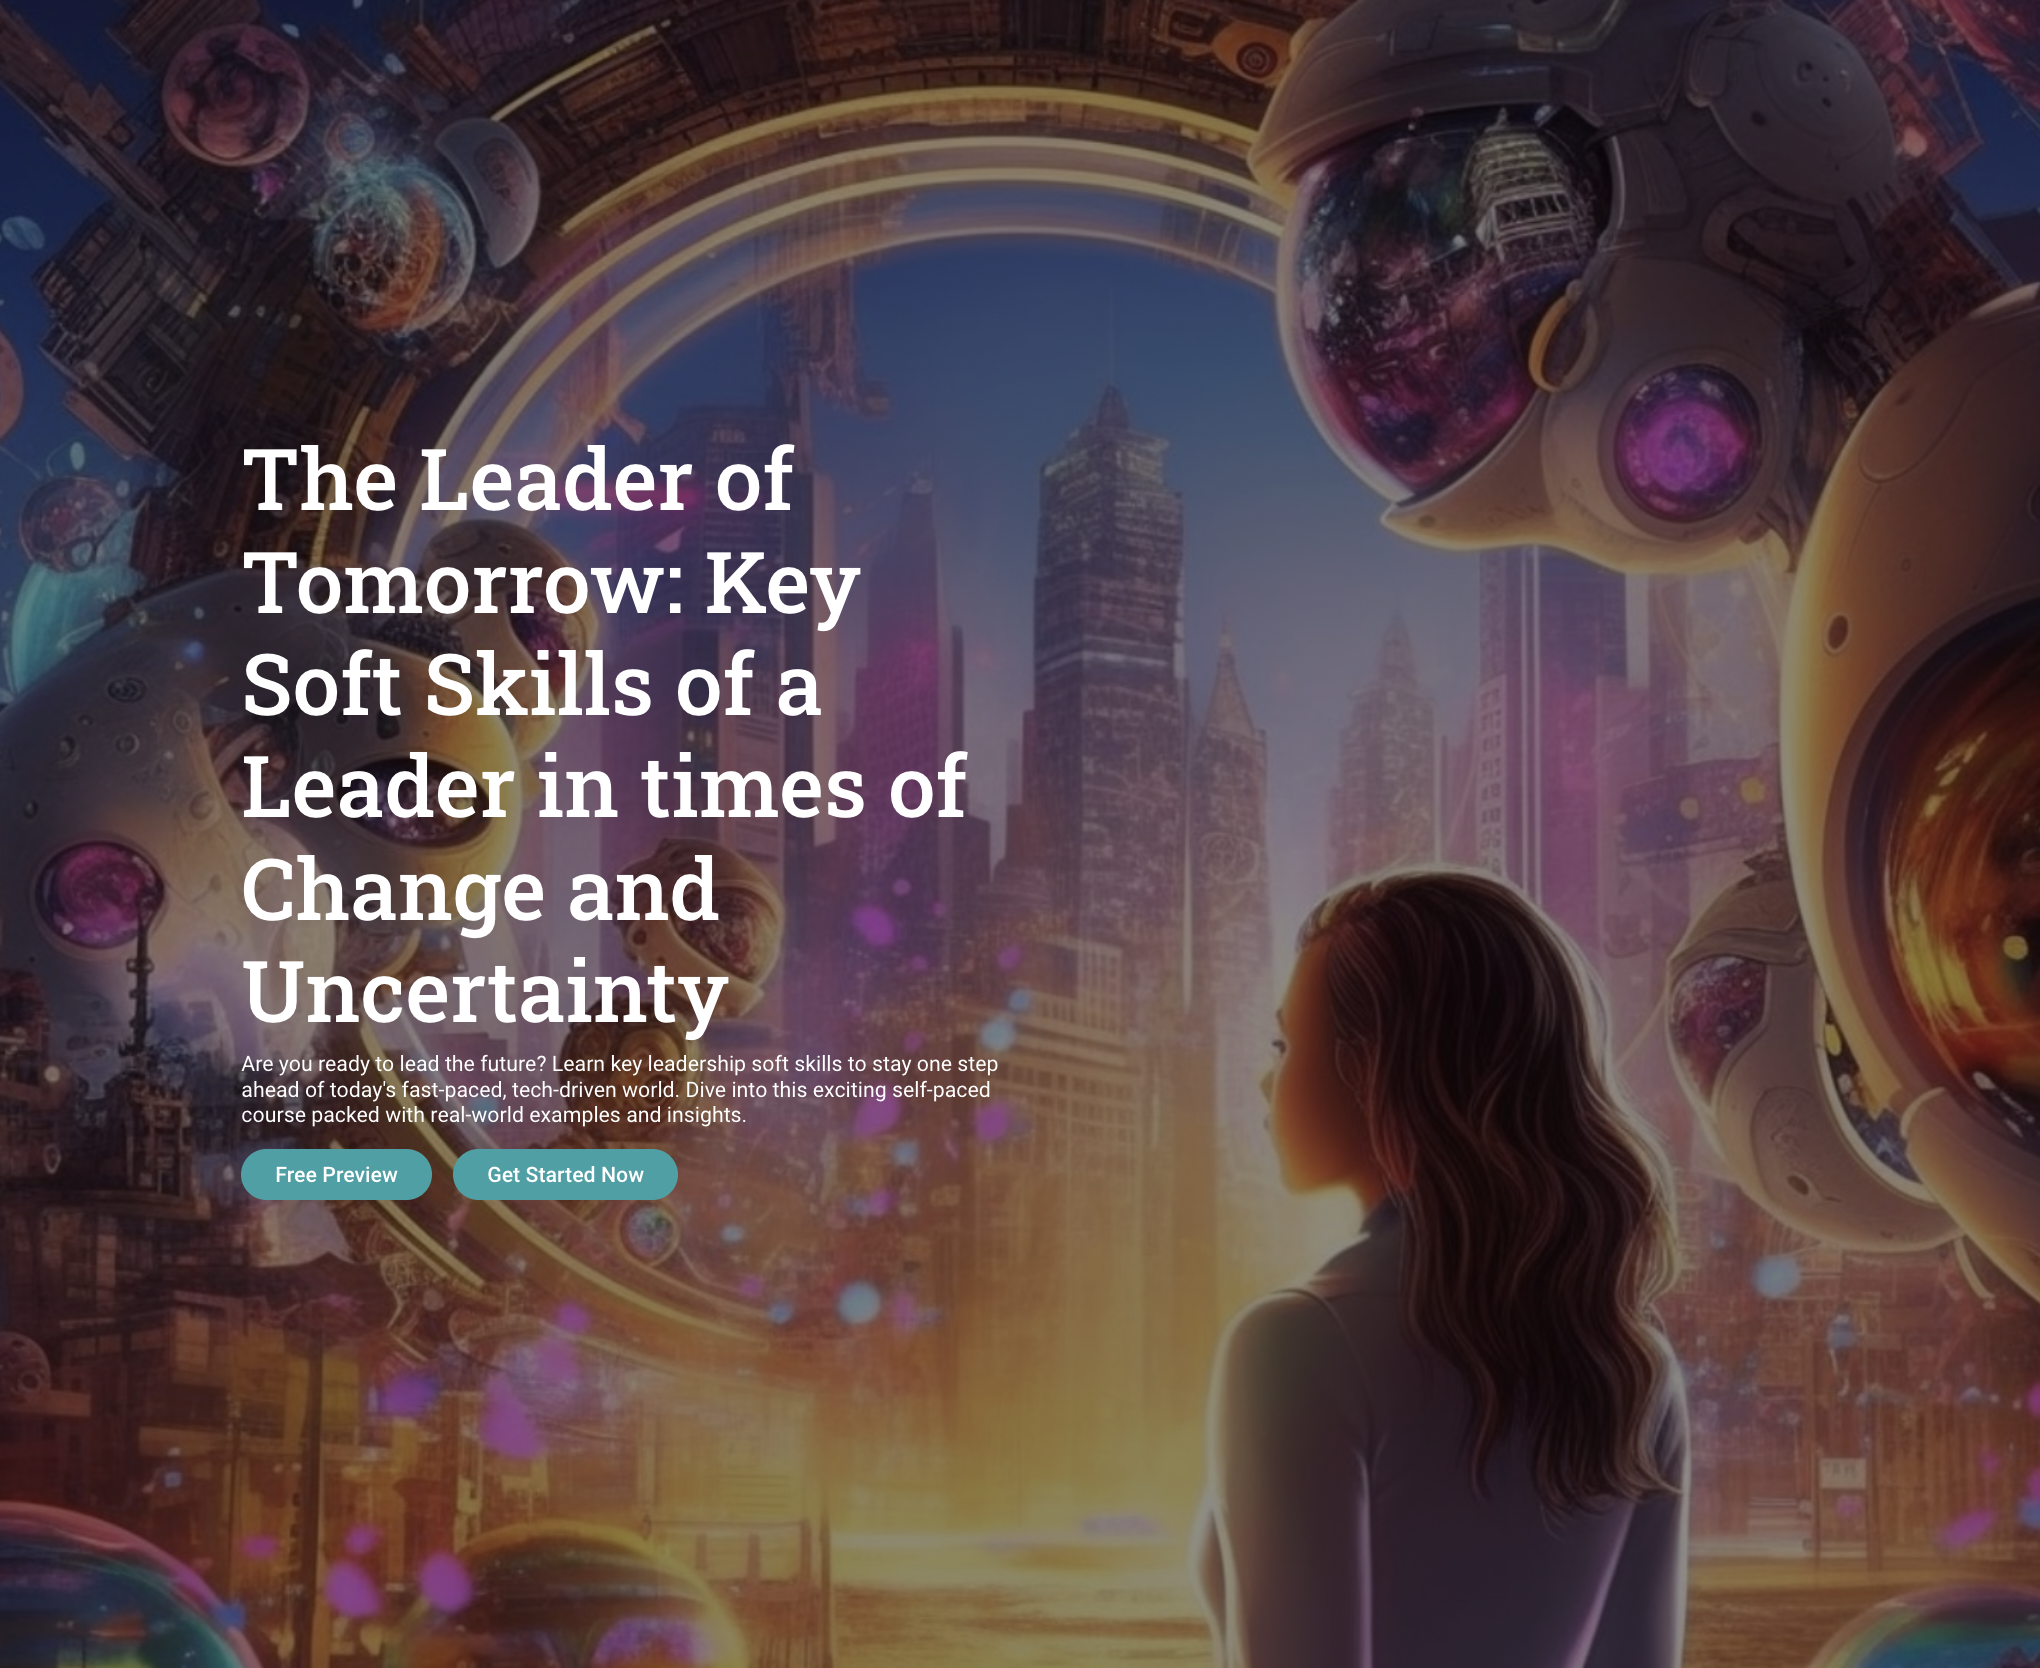 The Leader of Tomorrow: Key Soft Skills of a Leader in times of Change and Uncertainty